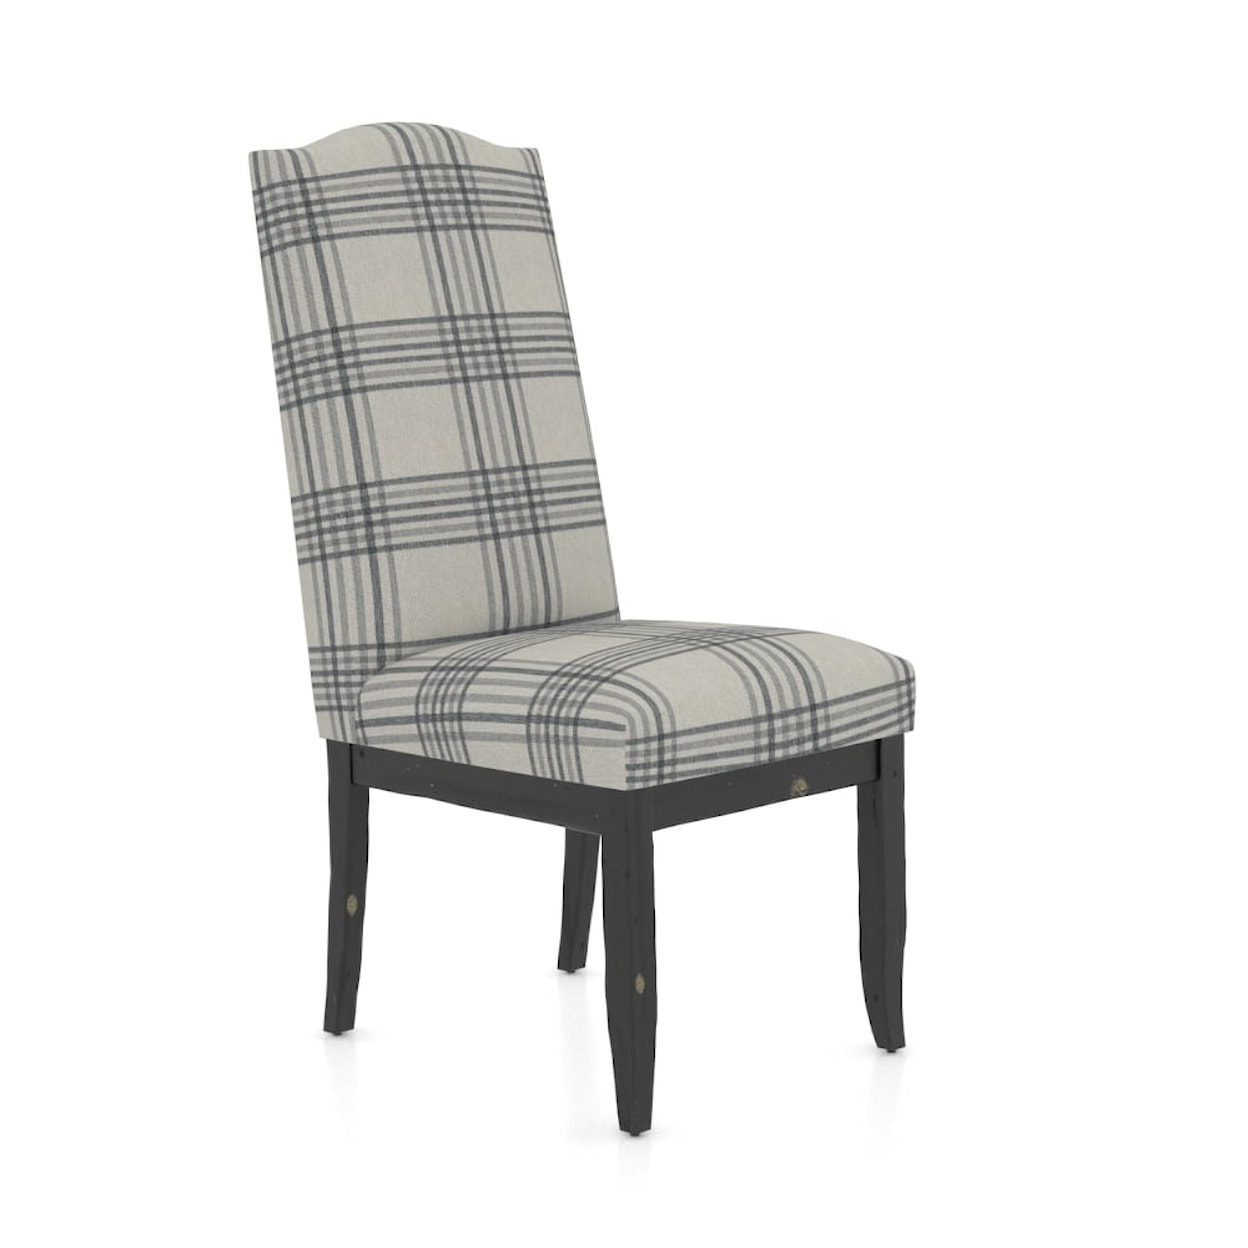 Canadel Champlain Customizable Upholstered Side Chair